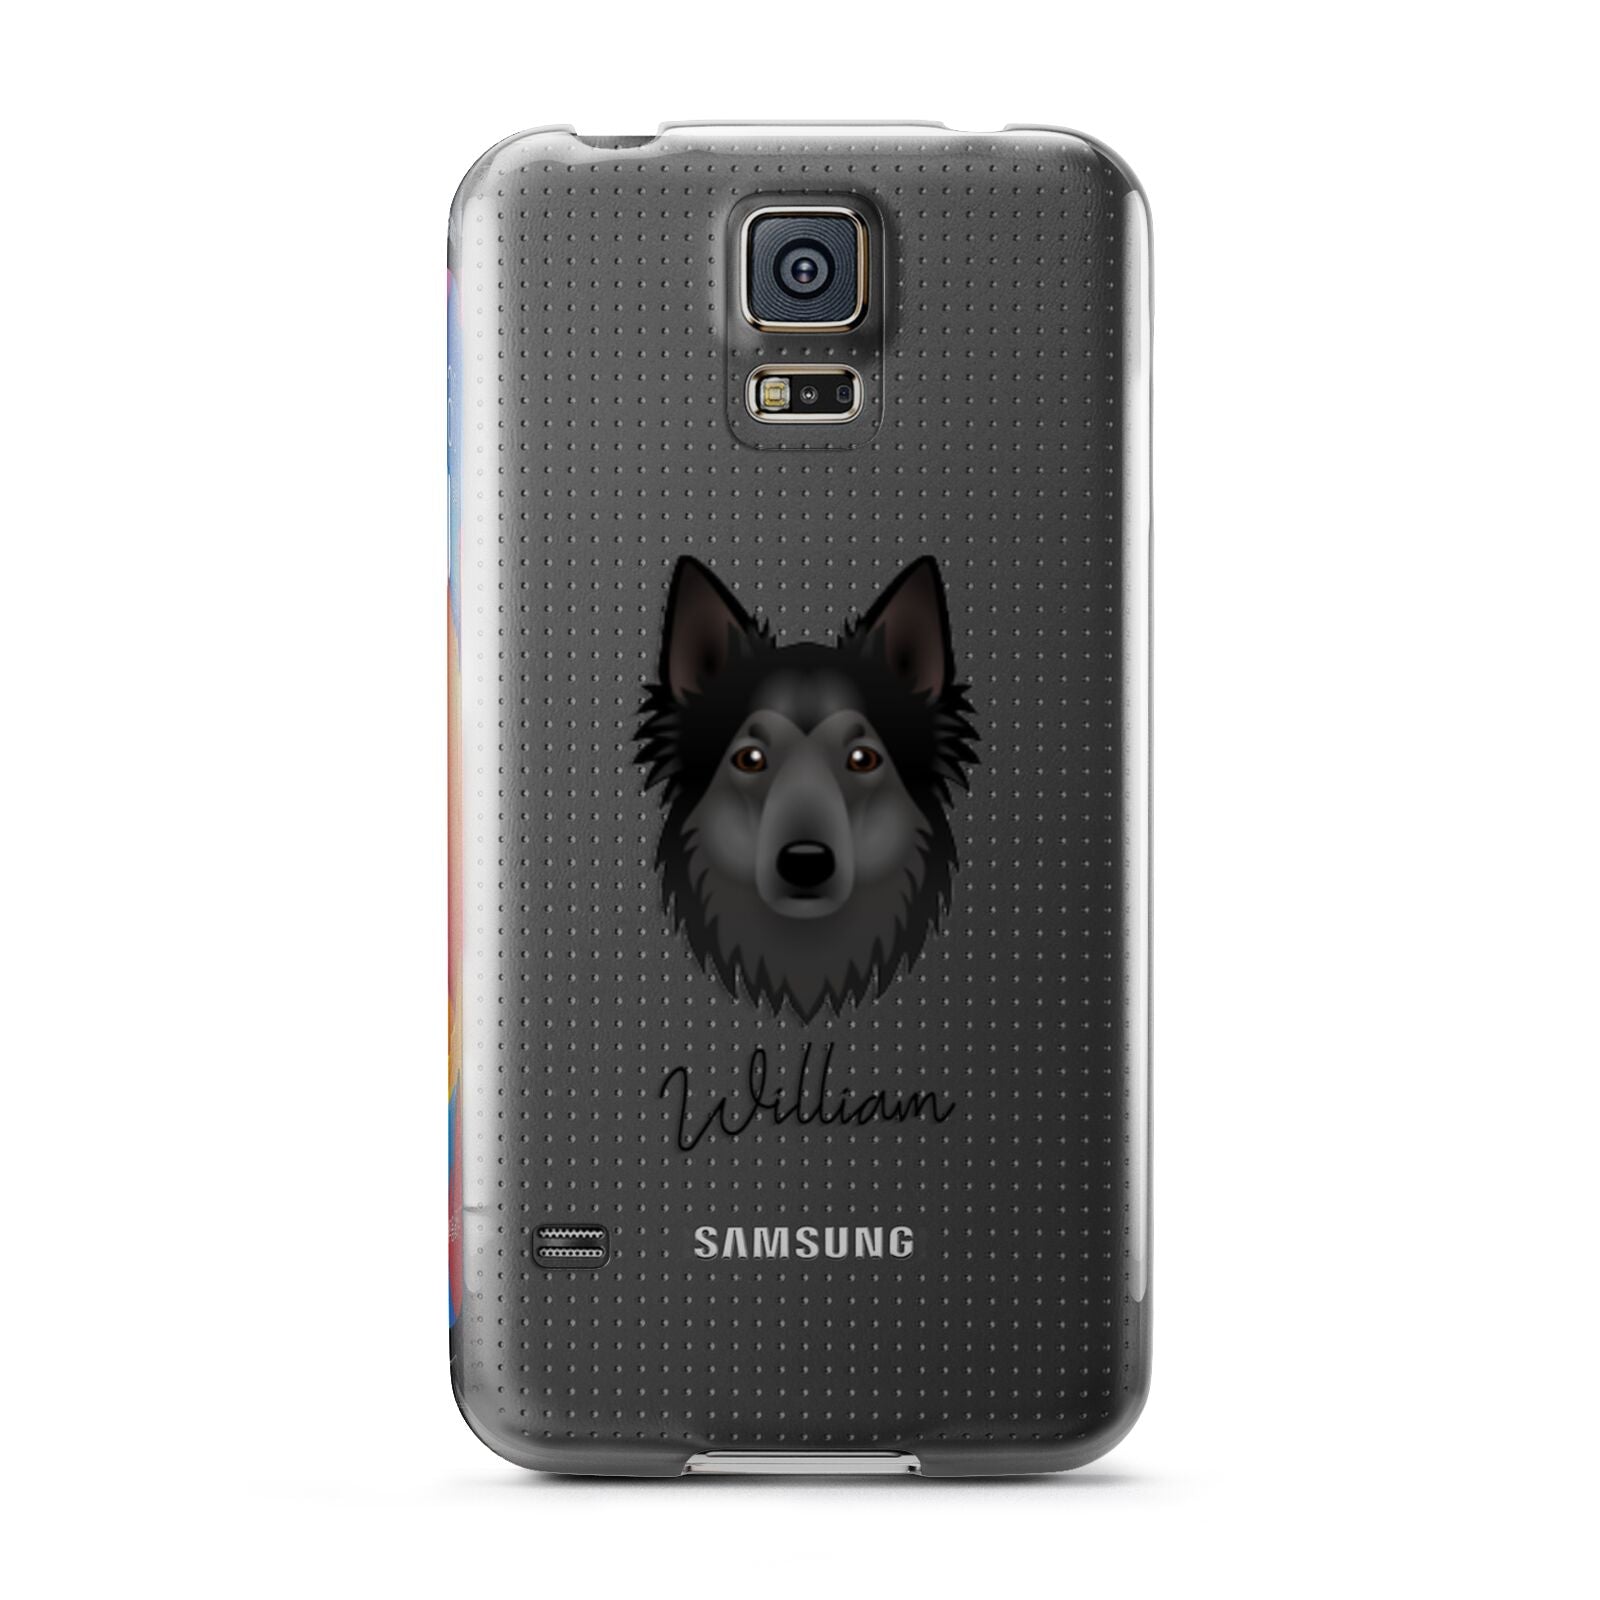 Shollie Personalised Samsung Galaxy S5 Case